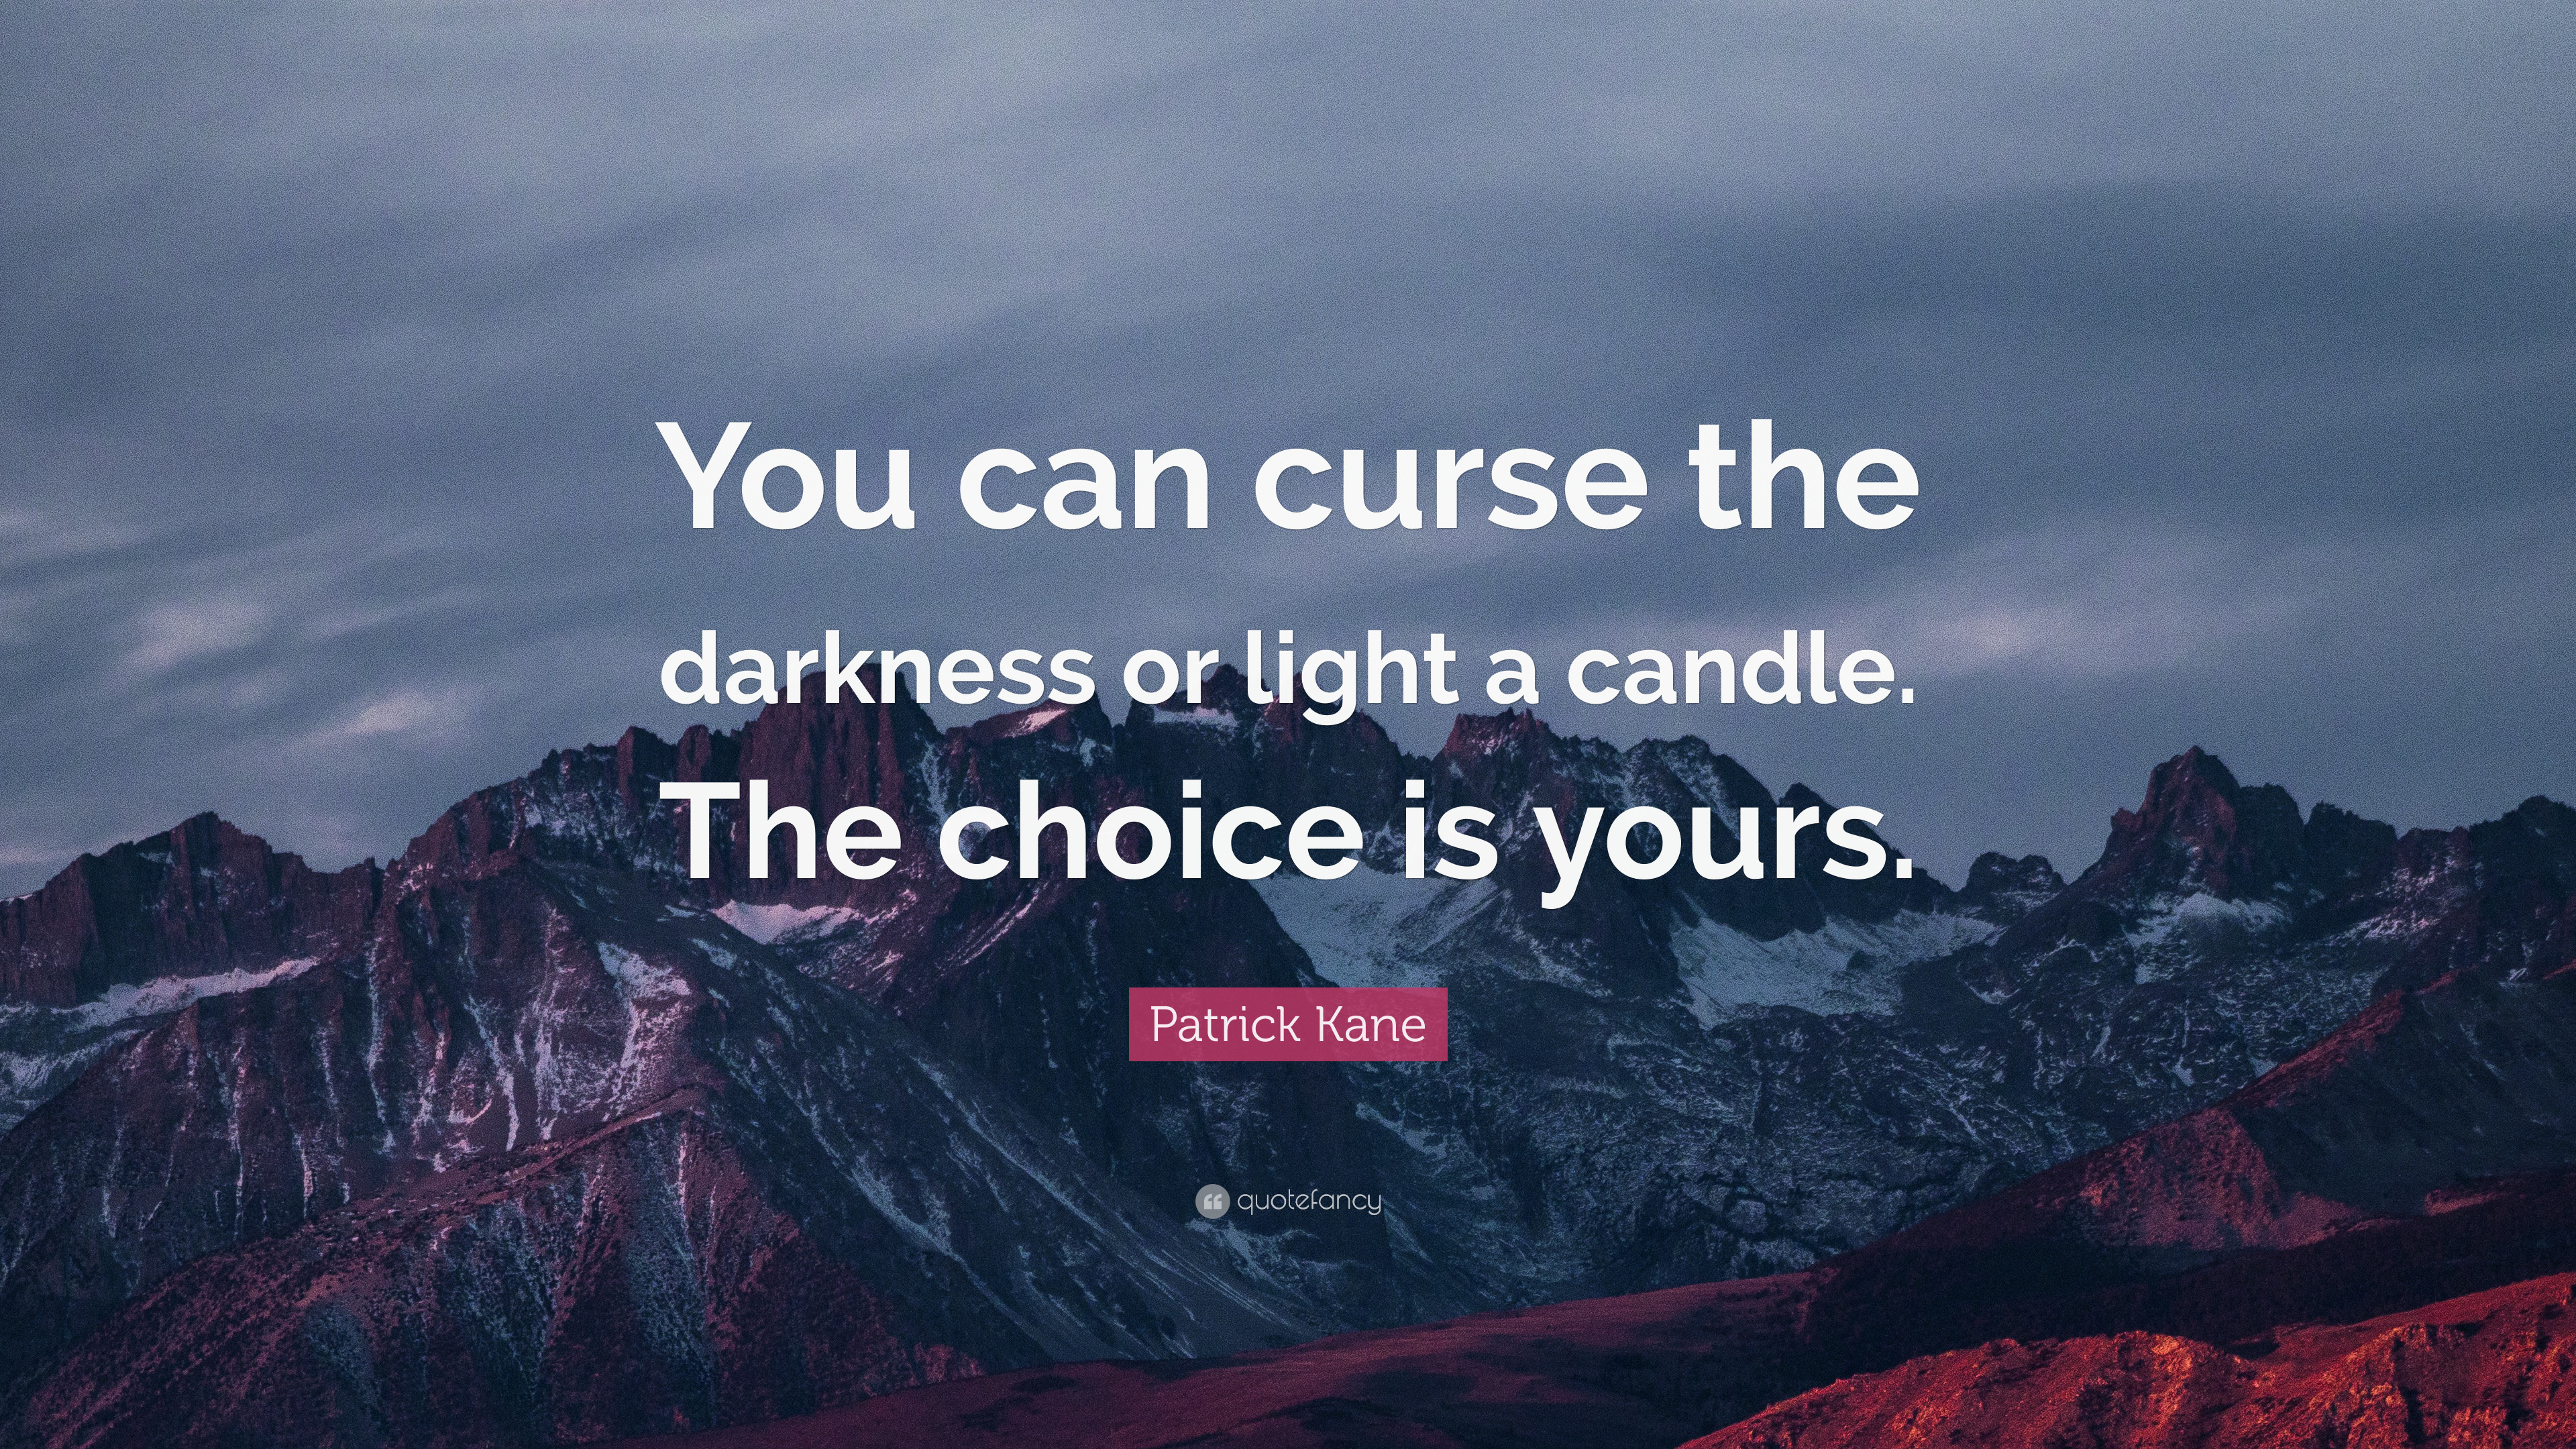 3840x2160 Patrick Kane Quote: “You can curse the darkness or light a candle. The